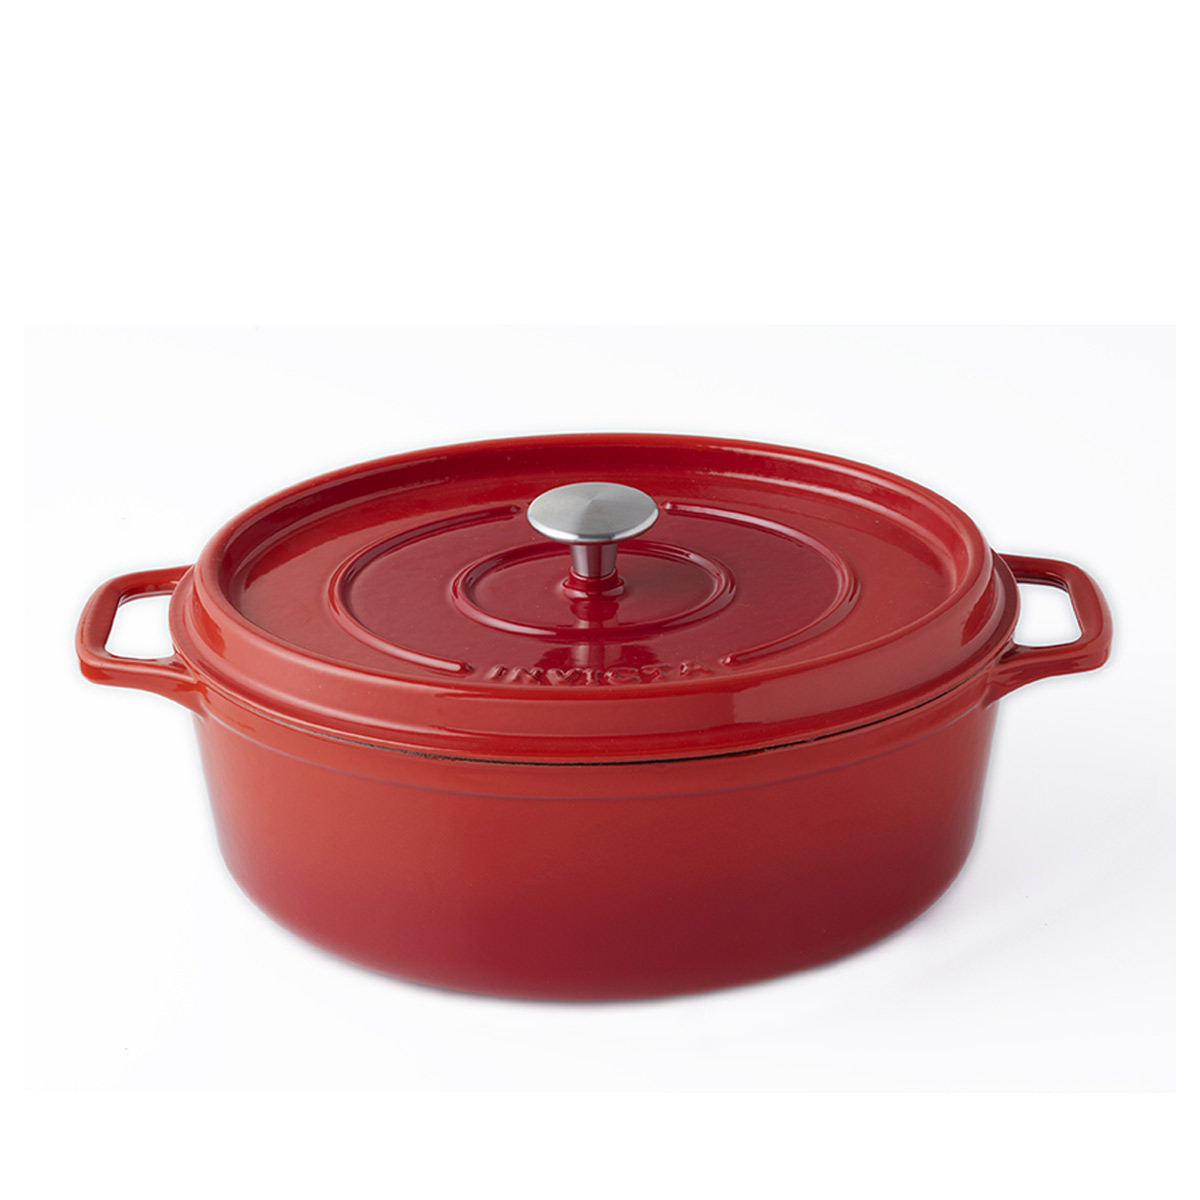 Invicta Cocotte oval 33 cm / 7,1 L - Gusseisen rot